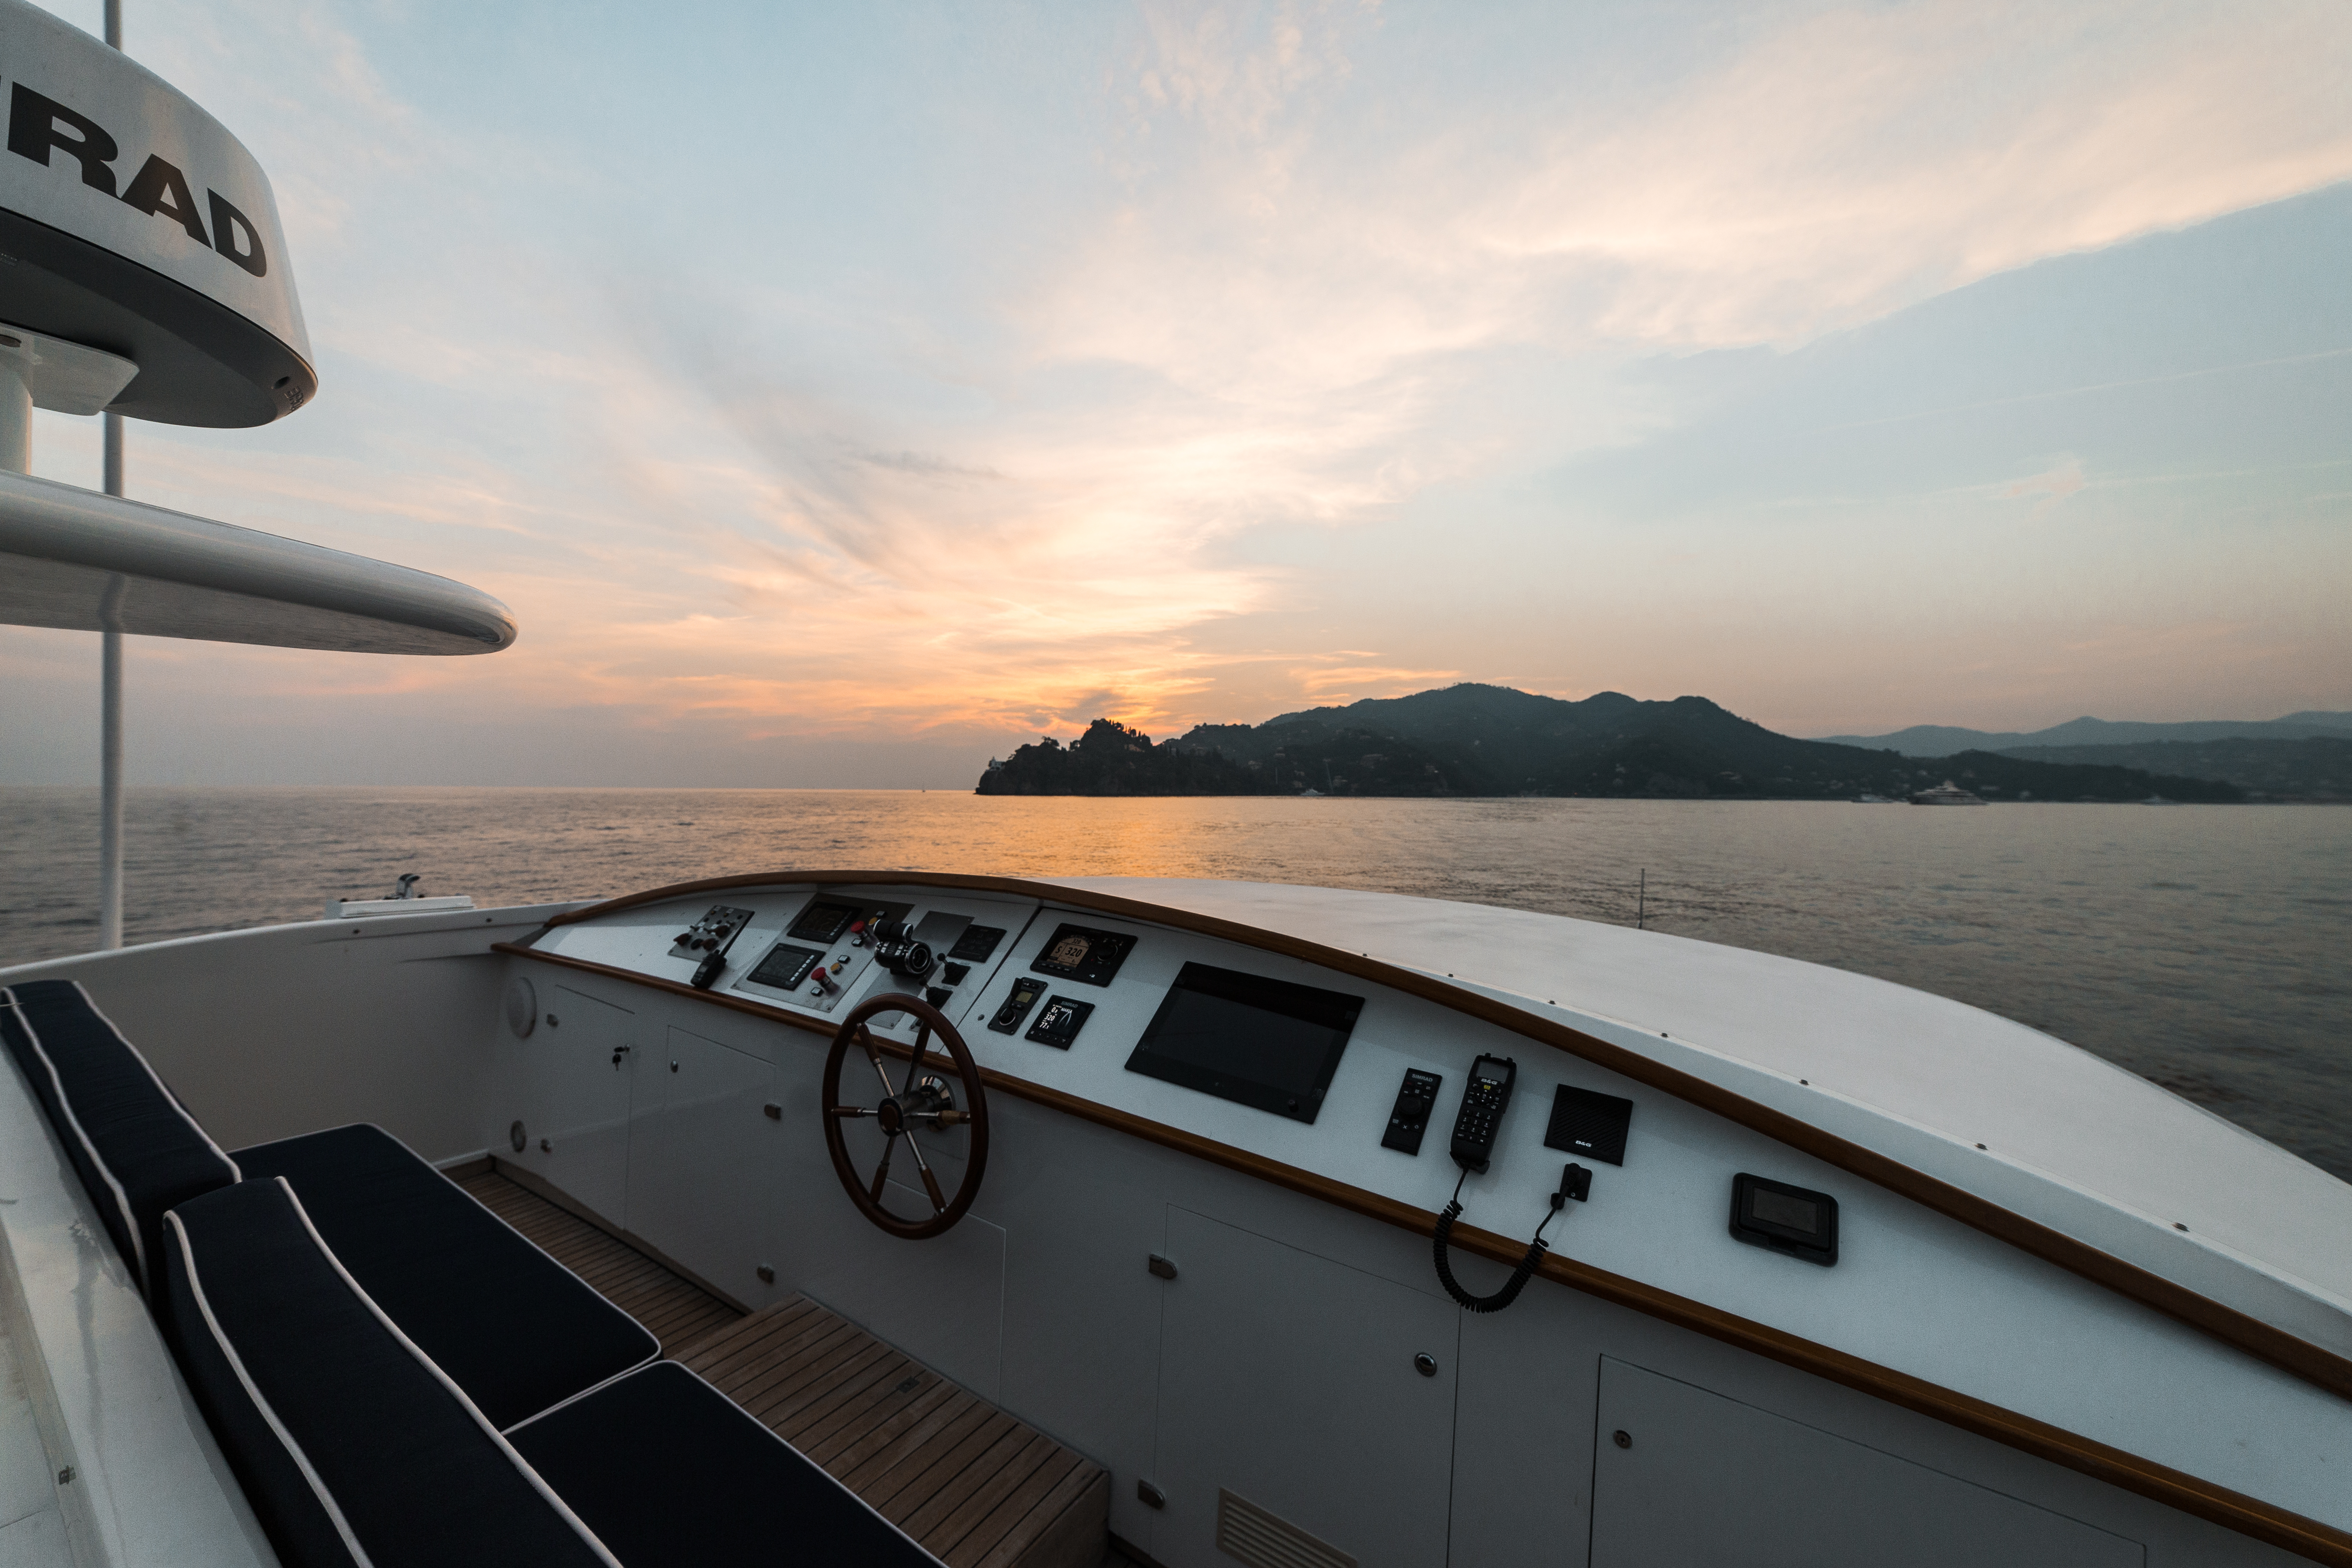 M/Y PAOLUCCI for charter deck area at sunset